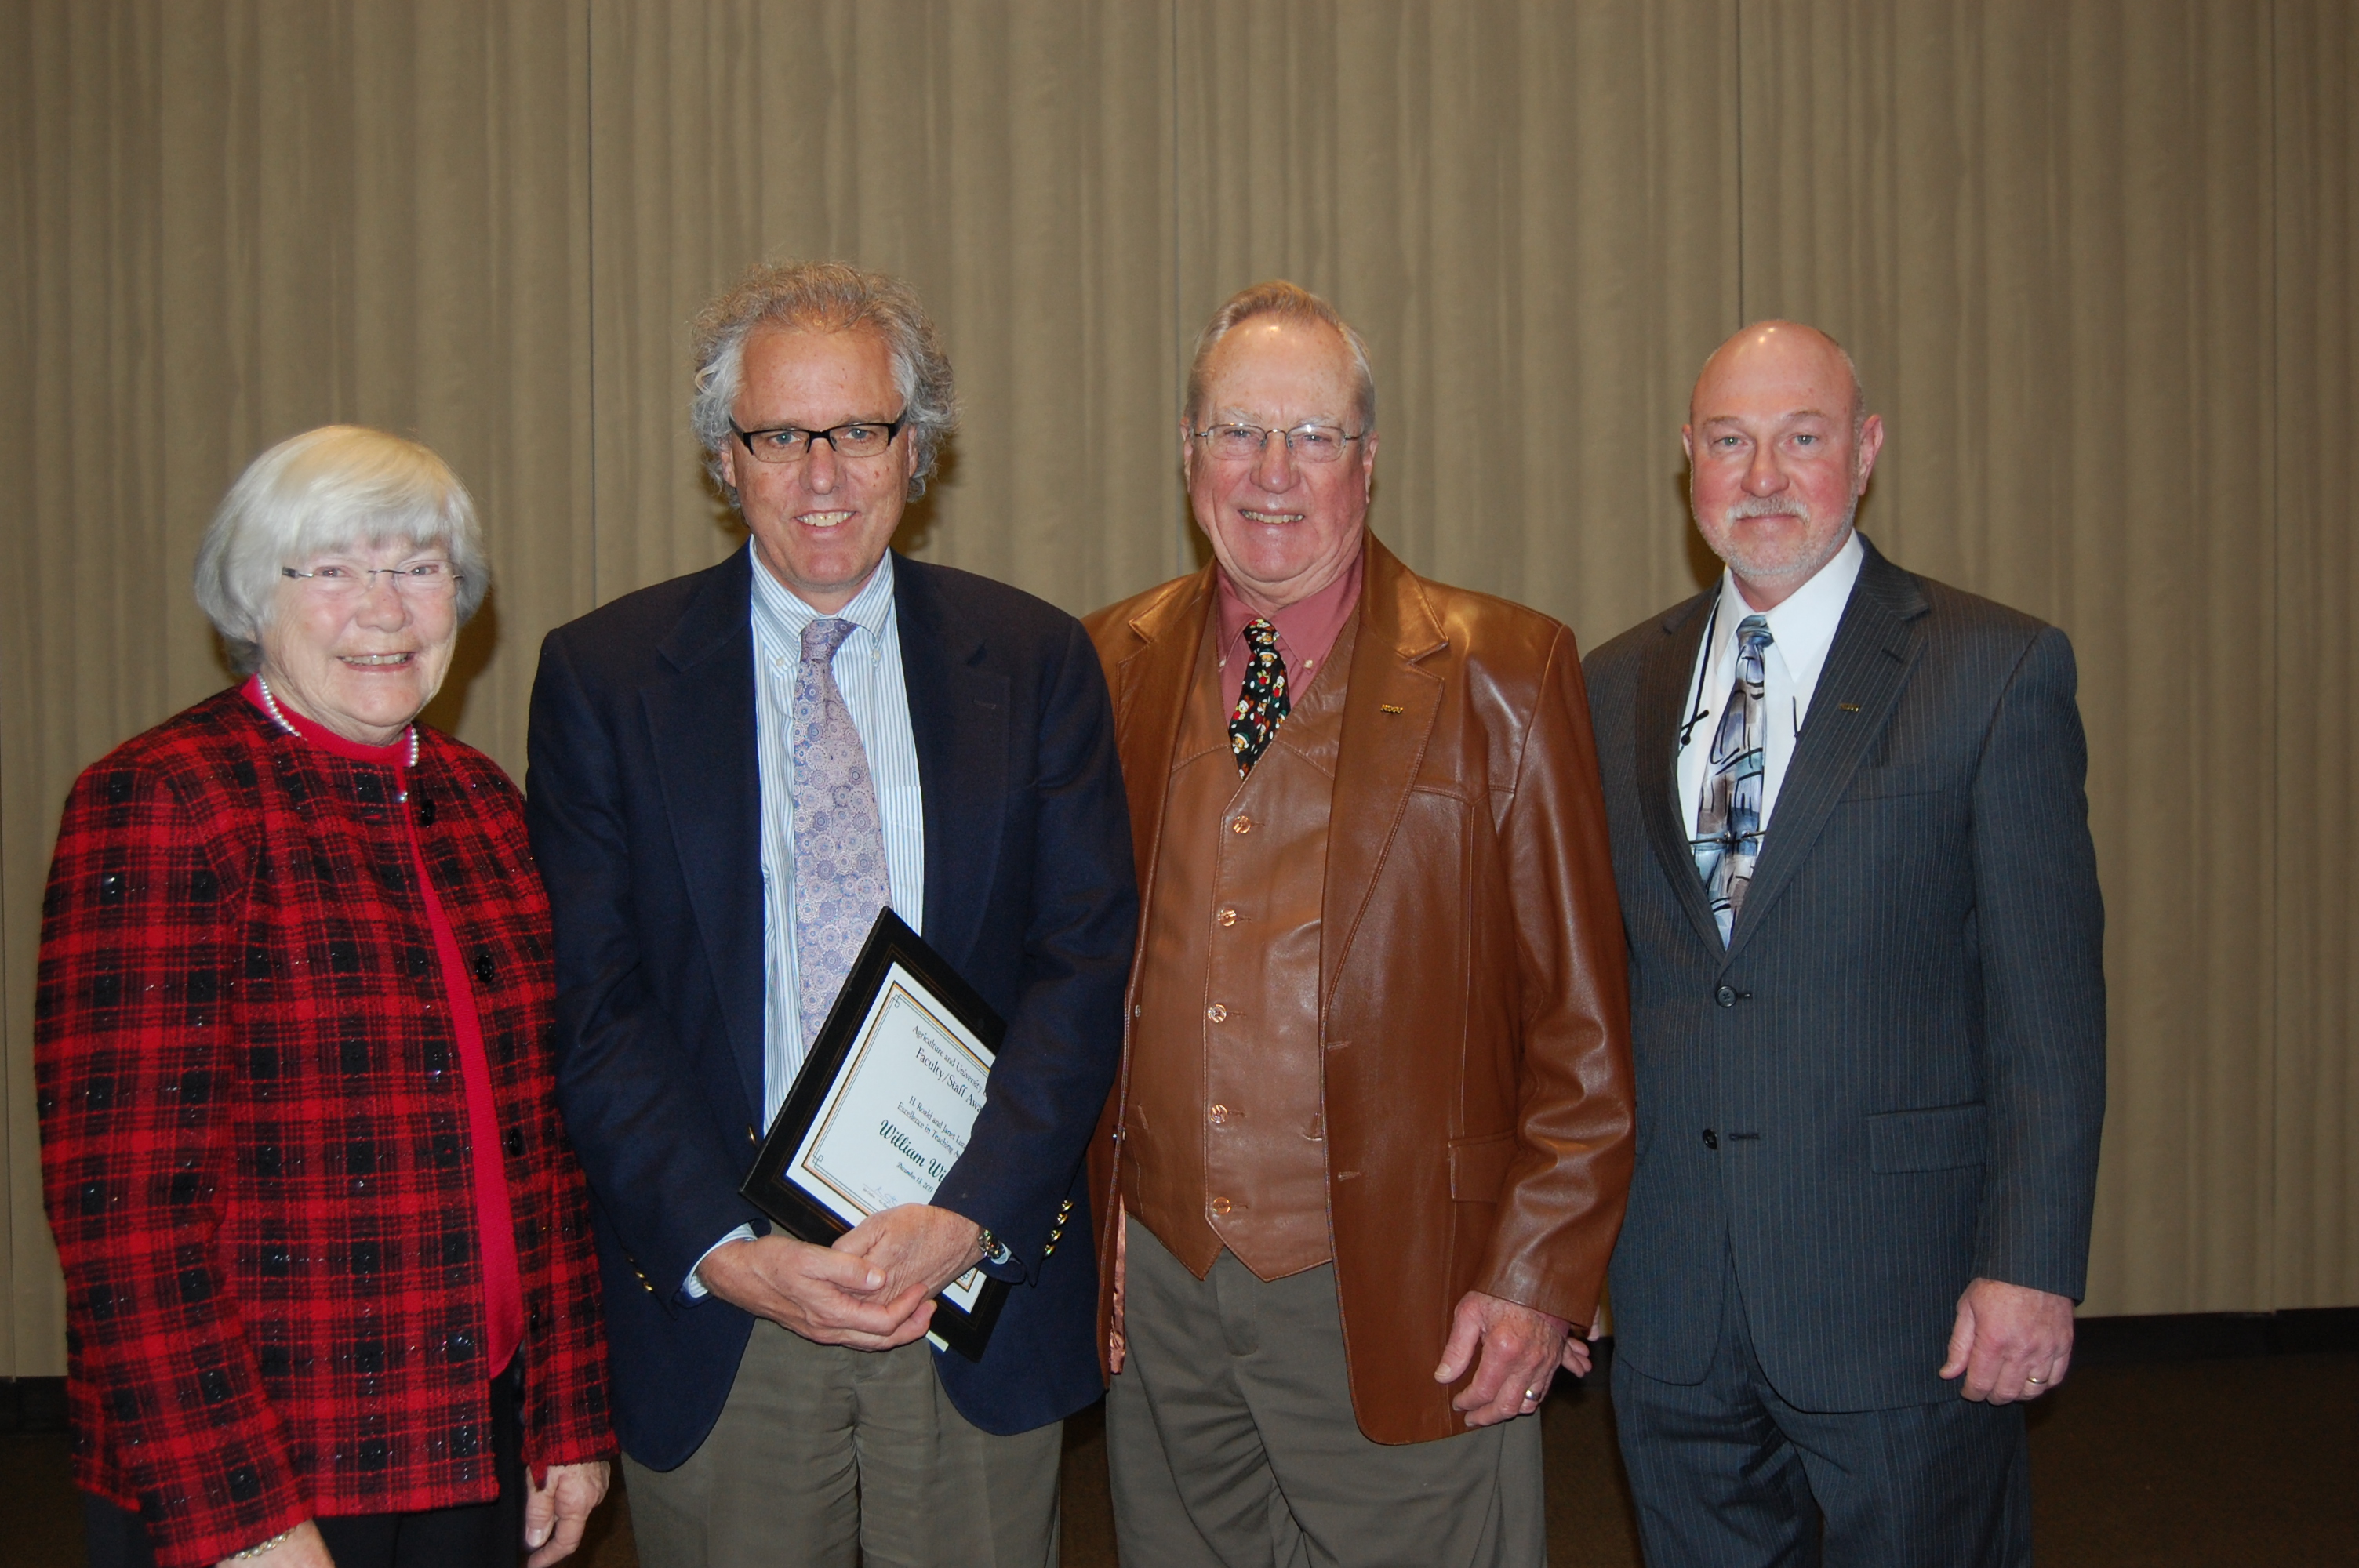 Bill Wilson (second from left) receives the H. Roald and Janet Lund Excellence in Teaching Award from Ken Grafton (far right), vice president for Agriculture and University Extension. Janet Lund (left) and H. Roald Lund (second from right) are the sponsors of the award.